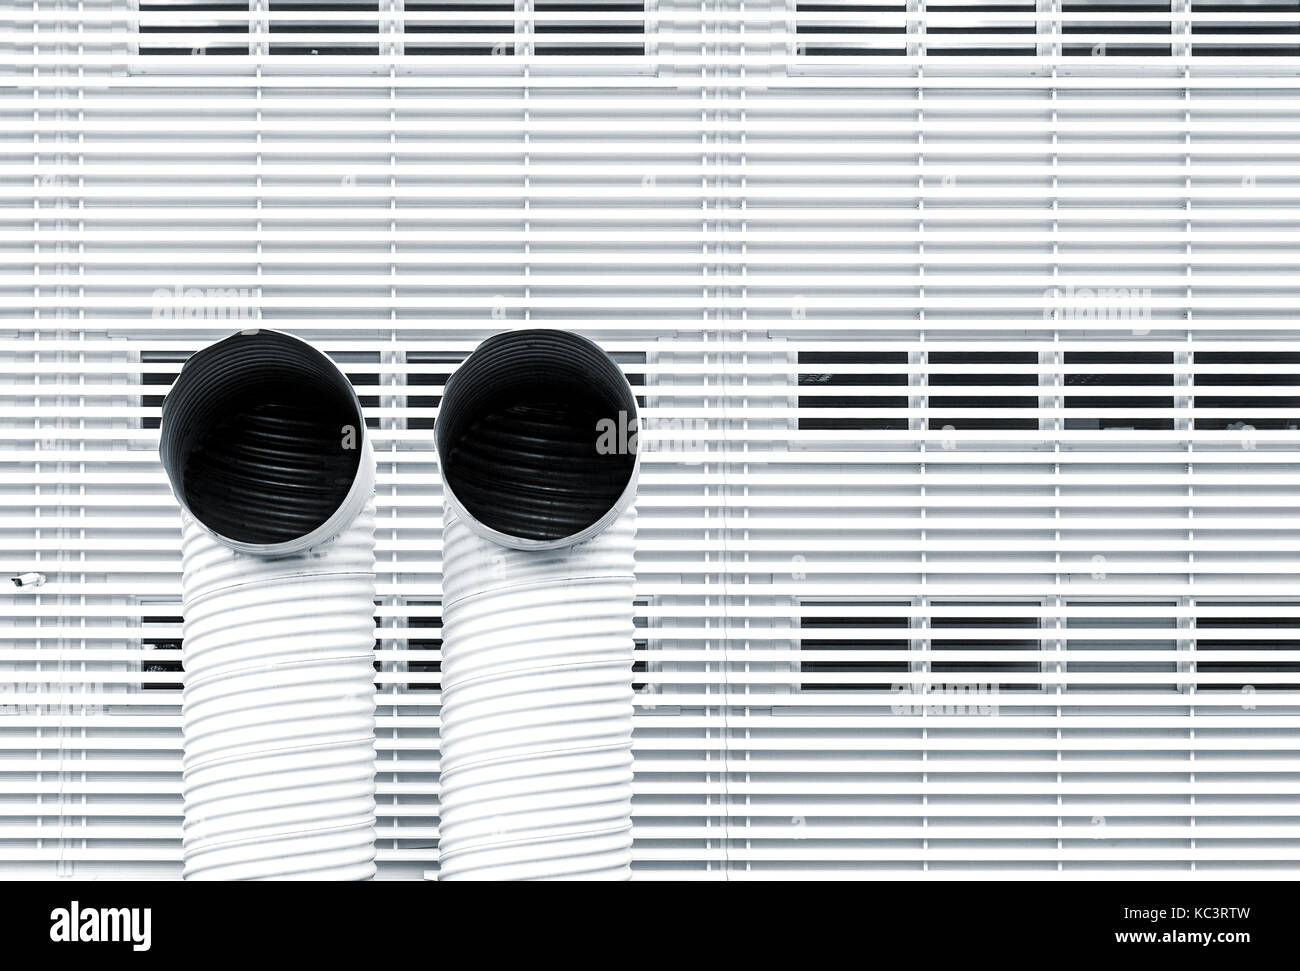 Abstract architecture picture with two ventilation pipes against striped metal facade Stock Photo